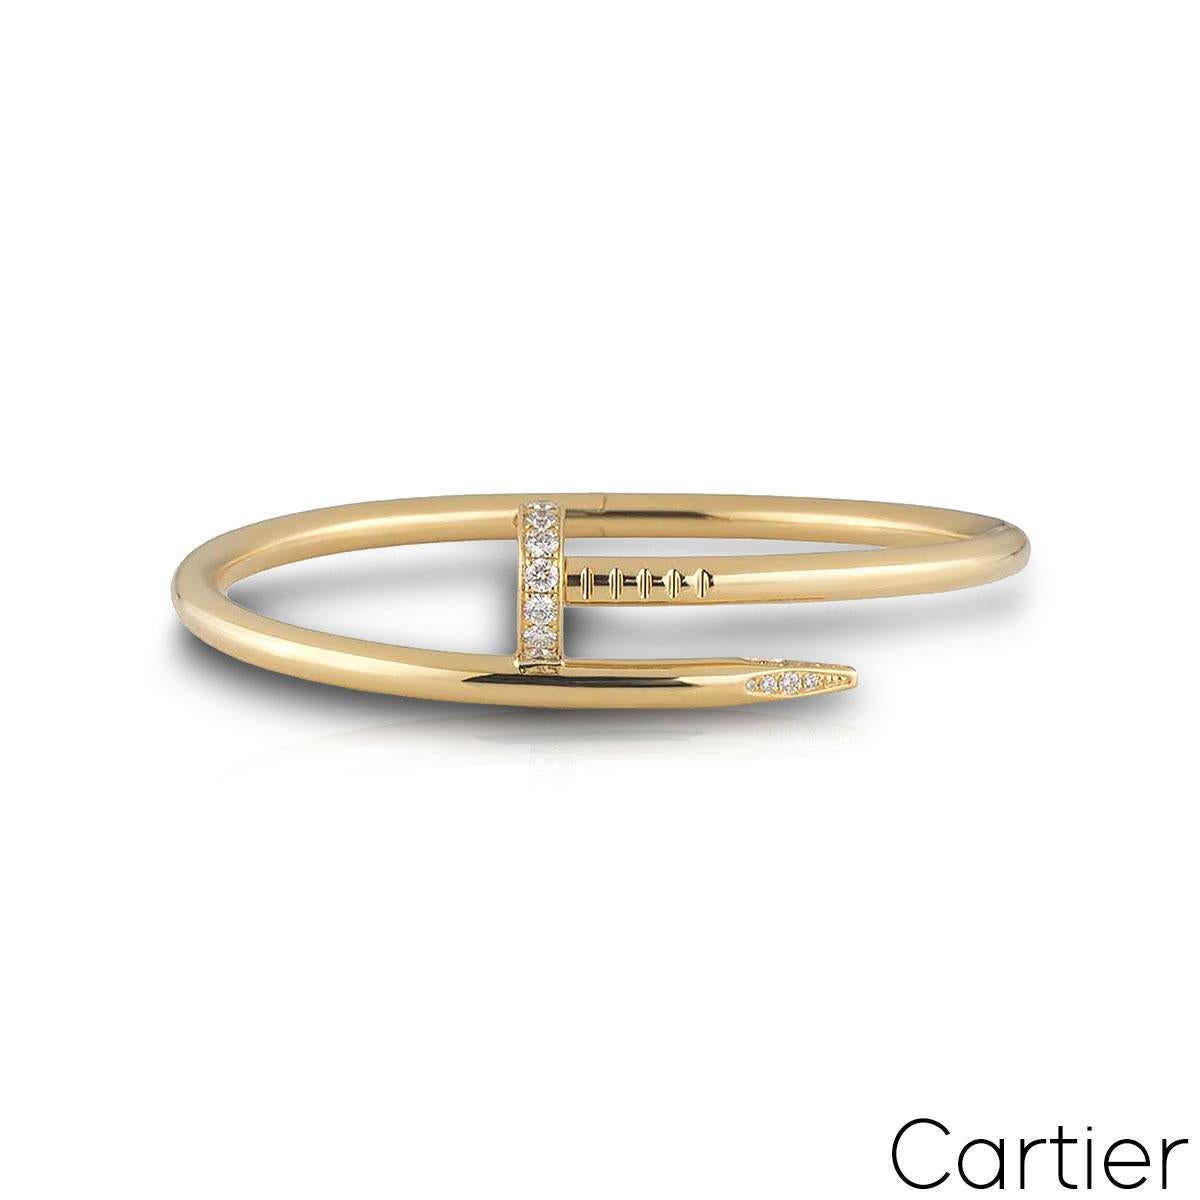 An 18k yellow gold Cartier diamond bracelet from the Juste Un Clou collection. The bracelet is in the style of a nail and has 27 round brilliant cut pave diamonds set in the head and tip, totalling 0.54ct. The diamonds are predominantly F colour and